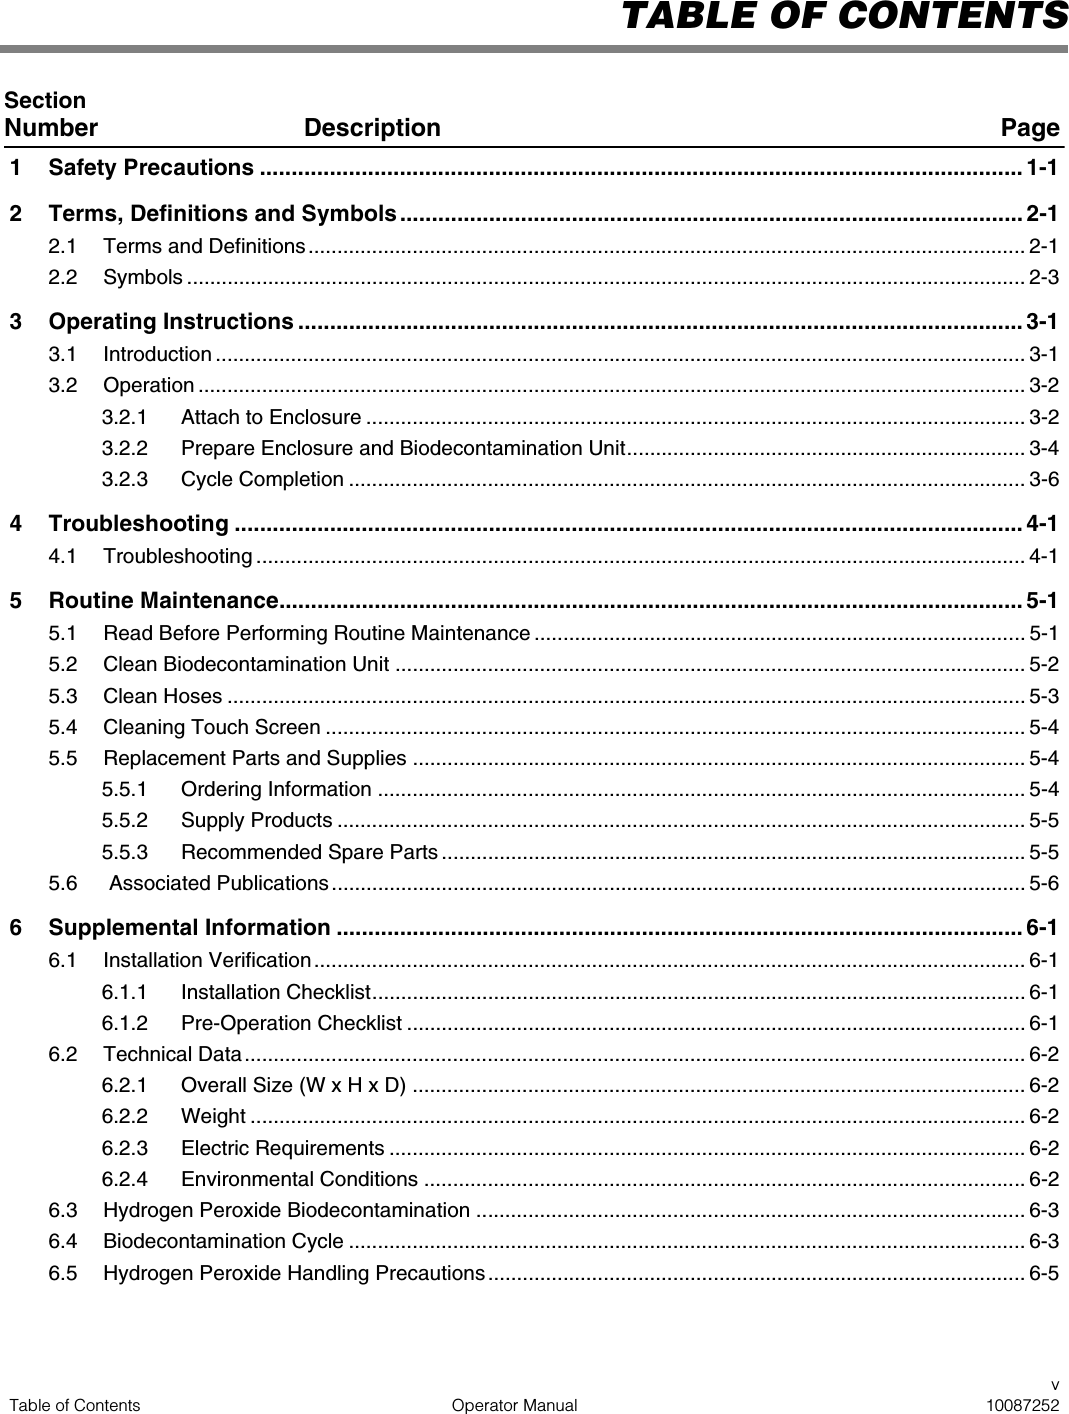 vTable of Contents Operator Manual 10087252TABLE OF CONTENTSSection Number Description Page1 Safety Precautions ........................................................................................................................ 1-12 Terms, Definitions and Symbols.................................................................................................. 2-12.1 Terms and Definitions ............................................................................................................................ 2-12.2 Symbols ................................................................................................................................................. 2-33 Operating Instructions .................................................................................................................. 3-13.1 Introduction ............................................................................................................................................ 3-13.2 Operation ............................................................................................................................................... 3-23.2.1 Attach to Enclosure .................................................................................................................. 3-23.2.2 Prepare Enclosure and Biodecontamination Unit..................................................................... 3-43.2.3 Cycle Completion ..................................................................................................................... 3-64 Troubleshooting ............................................................................................................................ 4-14.1 Troubleshooting ..................................................................................................................................... 4-15 Routine Maintenance..................................................................................................................... 5-15.1 Read Before Performing Routine Maintenance ..................................................................................... 5-15.2 Clean Biodecontamination Unit ............................................................................................................. 5-25.3 Clean Hoses .......................................................................................................................................... 5-35.4 Cleaning Touch Screen ......................................................................................................................... 5-45.5 Replacement Parts and Supplies .......................................................................................................... 5-45.5.1 Ordering Information ................................................................................................................ 5-45.5.2 Supply Products ....................................................................................................................... 5-55.5.3 Recommended Spare Parts ..................................................................................................... 5-55.6  Associated Publications........................................................................................................................ 5-66 Supplemental Information ............................................................................................................ 6-16.1 Installation Verification........................................................................................................................... 6-16.1.1 Installation Checklist................................................................................................................. 6-16.1.2 Pre-Operation Checklist ........................................................................................................... 6-16.2 Technical Data ....................................................................................................................................... 6-26.2.1 Overall Size (W x H x D) .......................................................................................................... 6-26.2.2 Weight ...................................................................................................................................... 6-26.2.3 Electric Requirements .............................................................................................................. 6-26.2.4 Environmental Conditions ........................................................................................................ 6-26.3 Hydrogen Peroxide Biodecontamination ............................................................................................... 6-36.4 Biodecontamination Cycle ..................................................................................................................... 6-36.5 Hydrogen Peroxide Handling Precautions ............................................................................................. 6-5